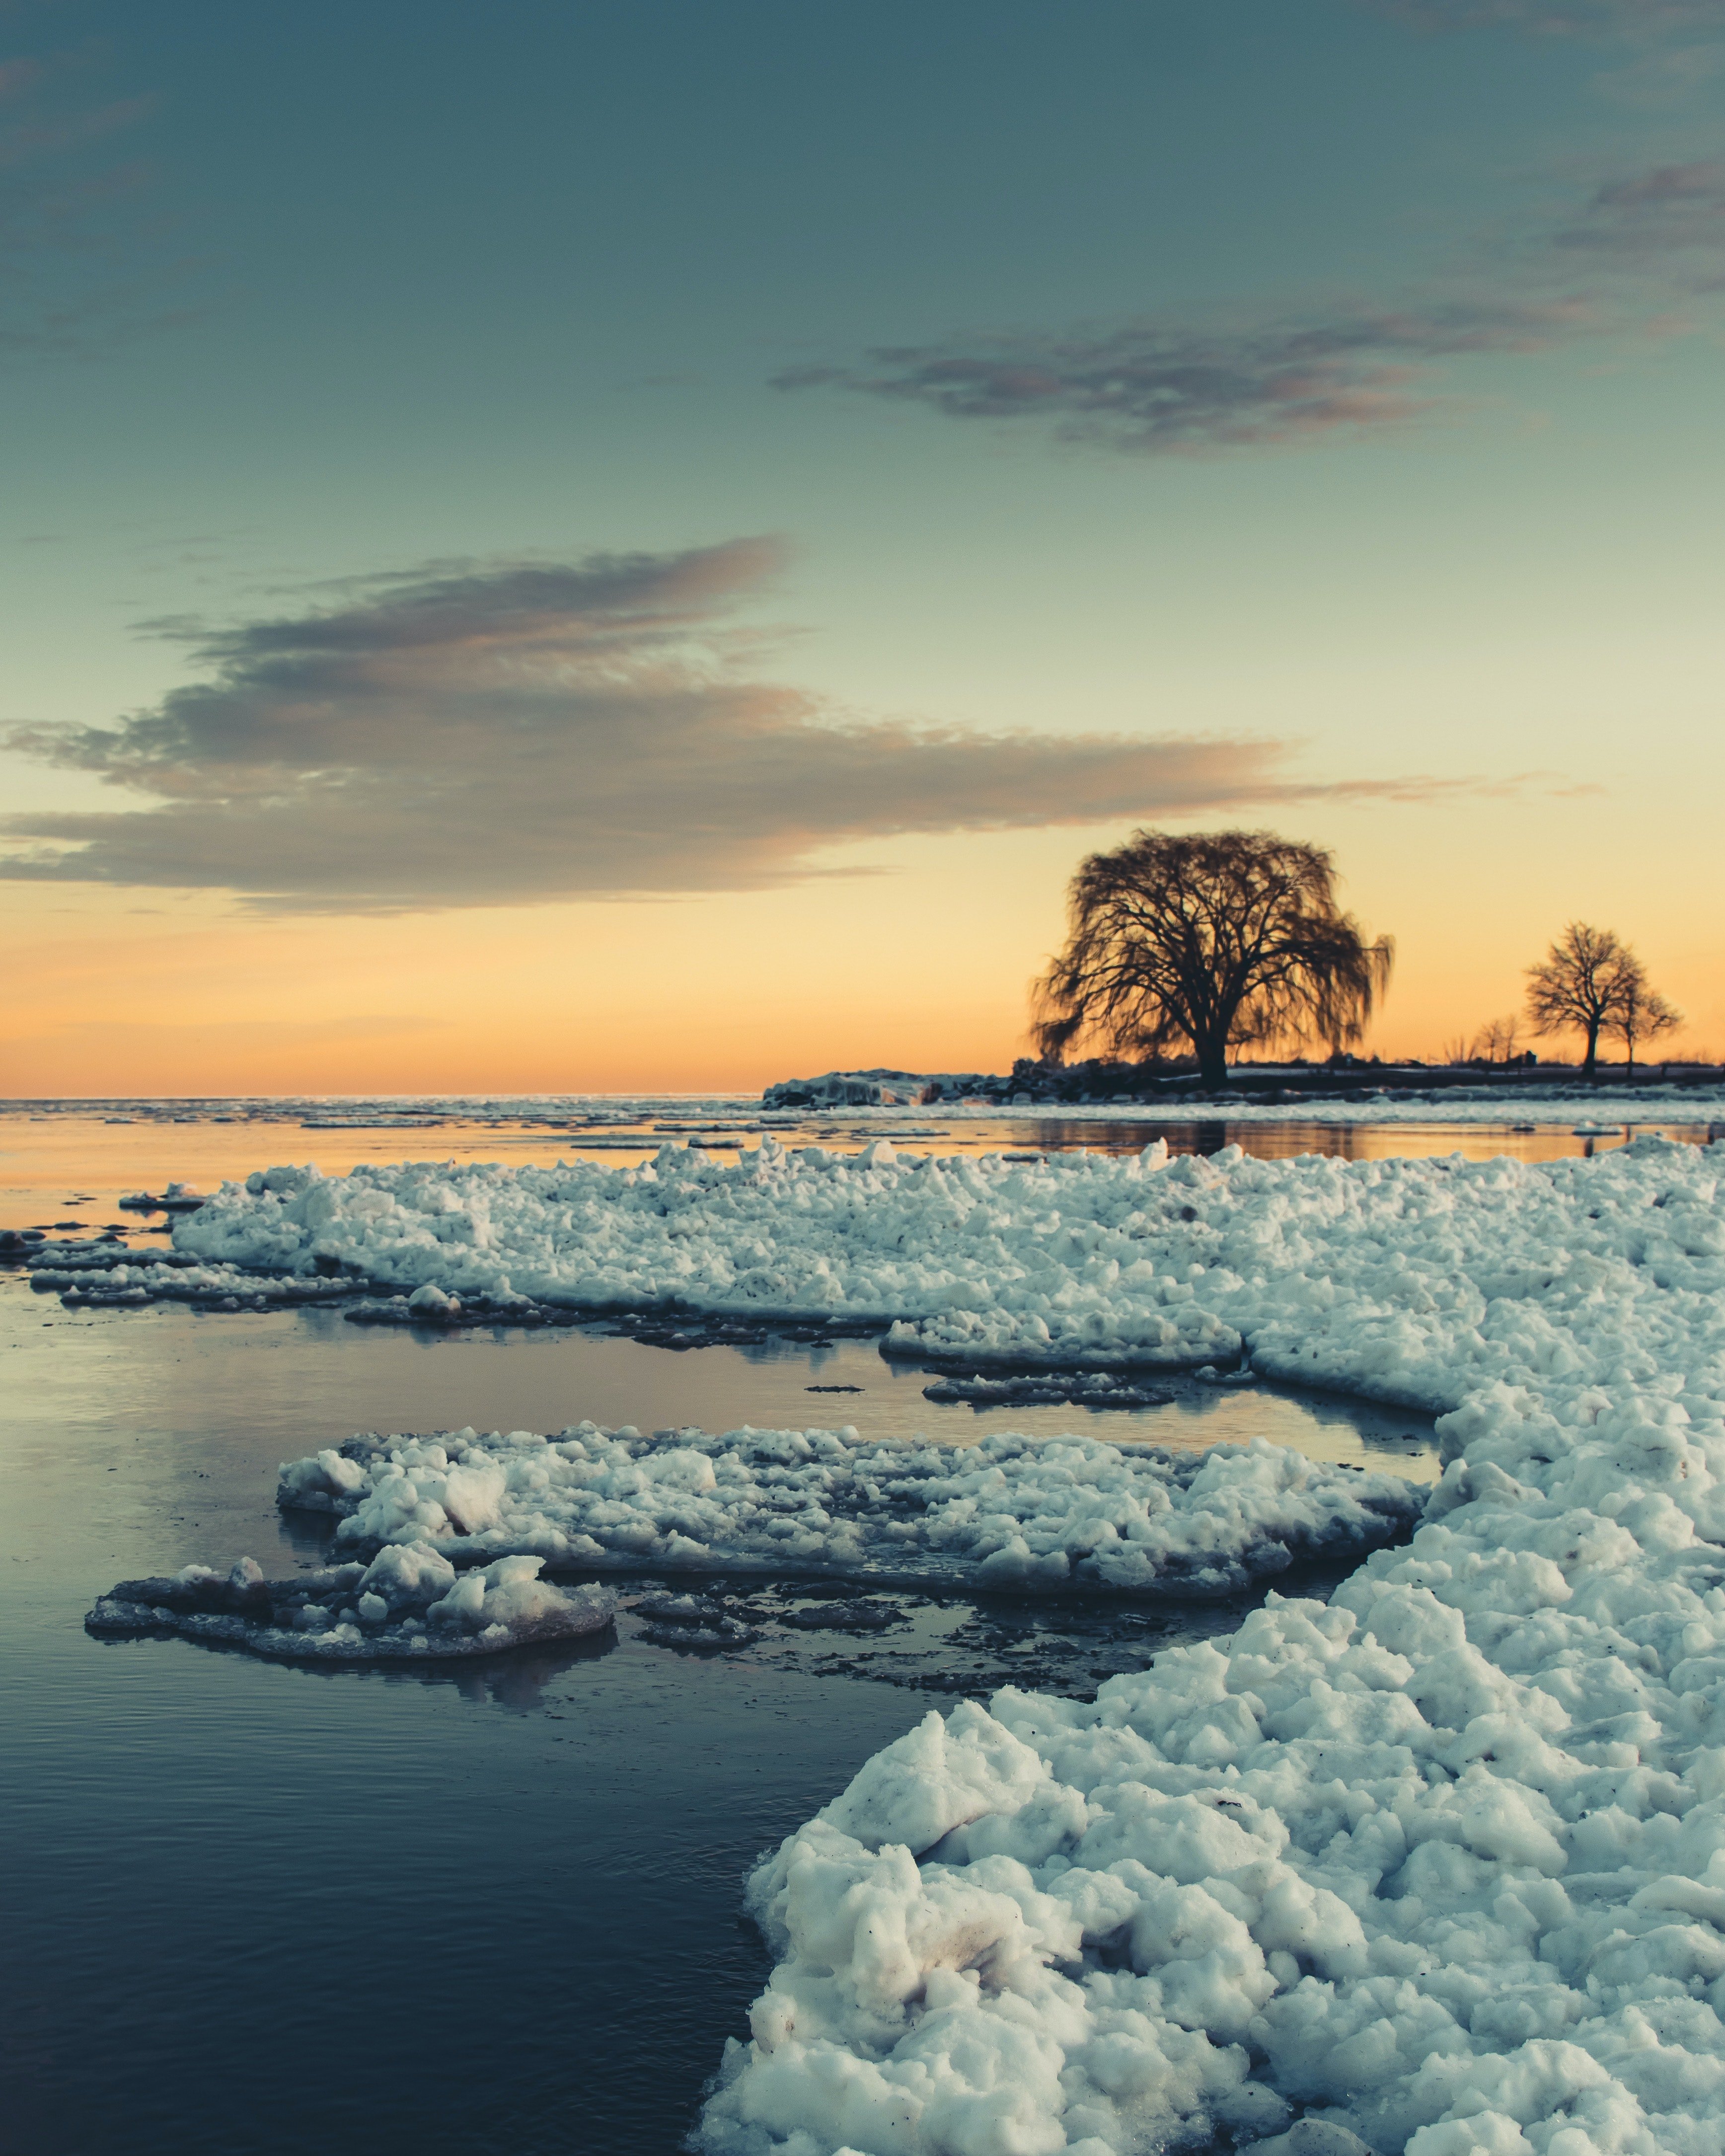 A sunset picture of a frozen pond | Source: Pexels